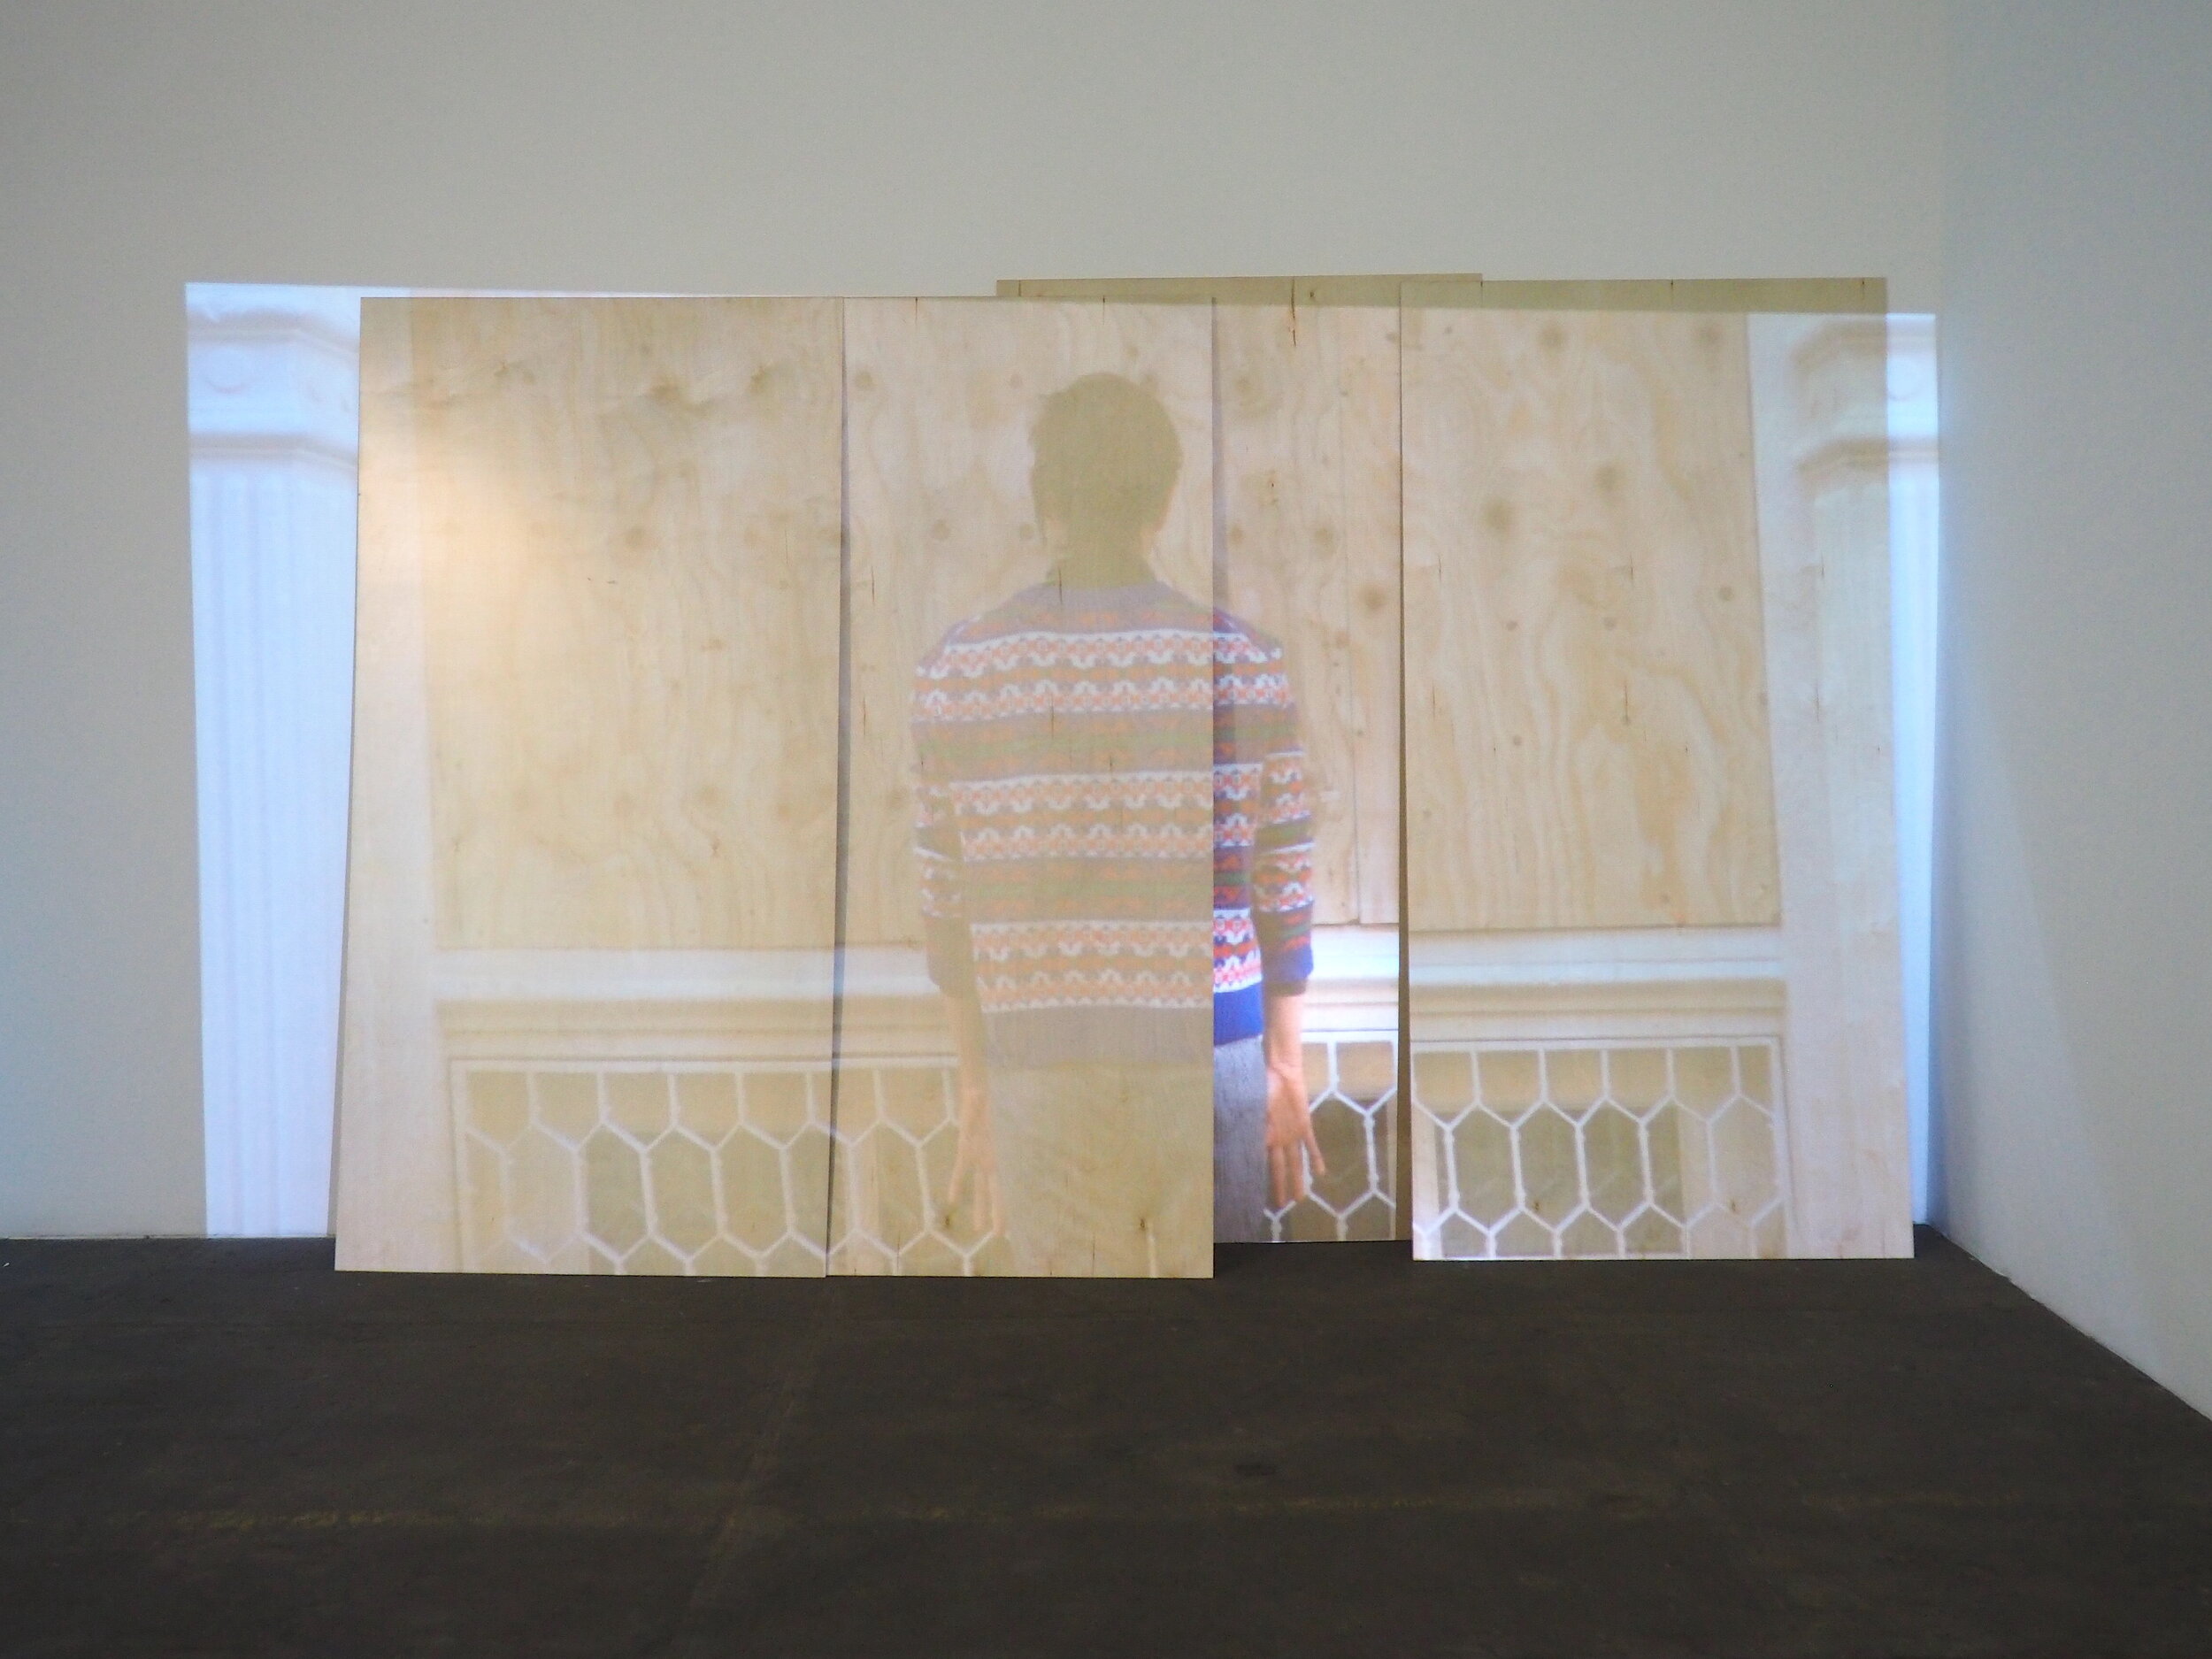  Kristin McIver&nbsp;  Divided Line , 2020  video installation  dimensions variable 